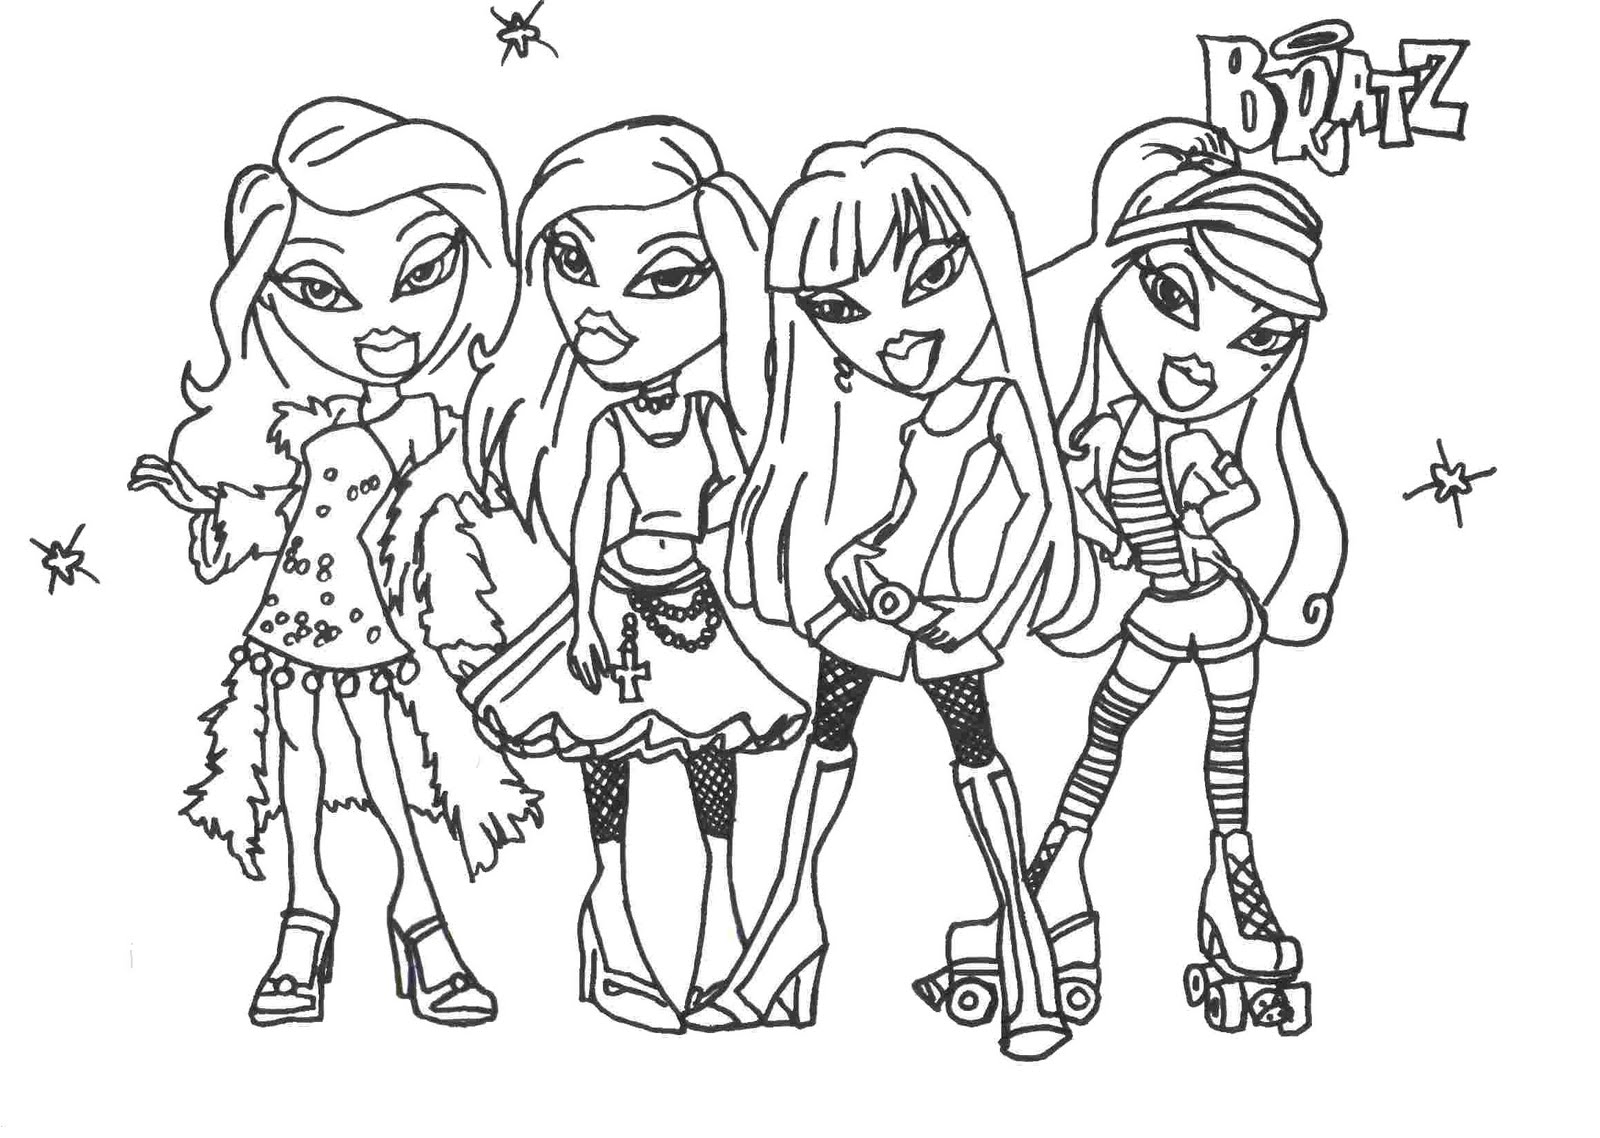 Bratz coloring pages to download and print for free